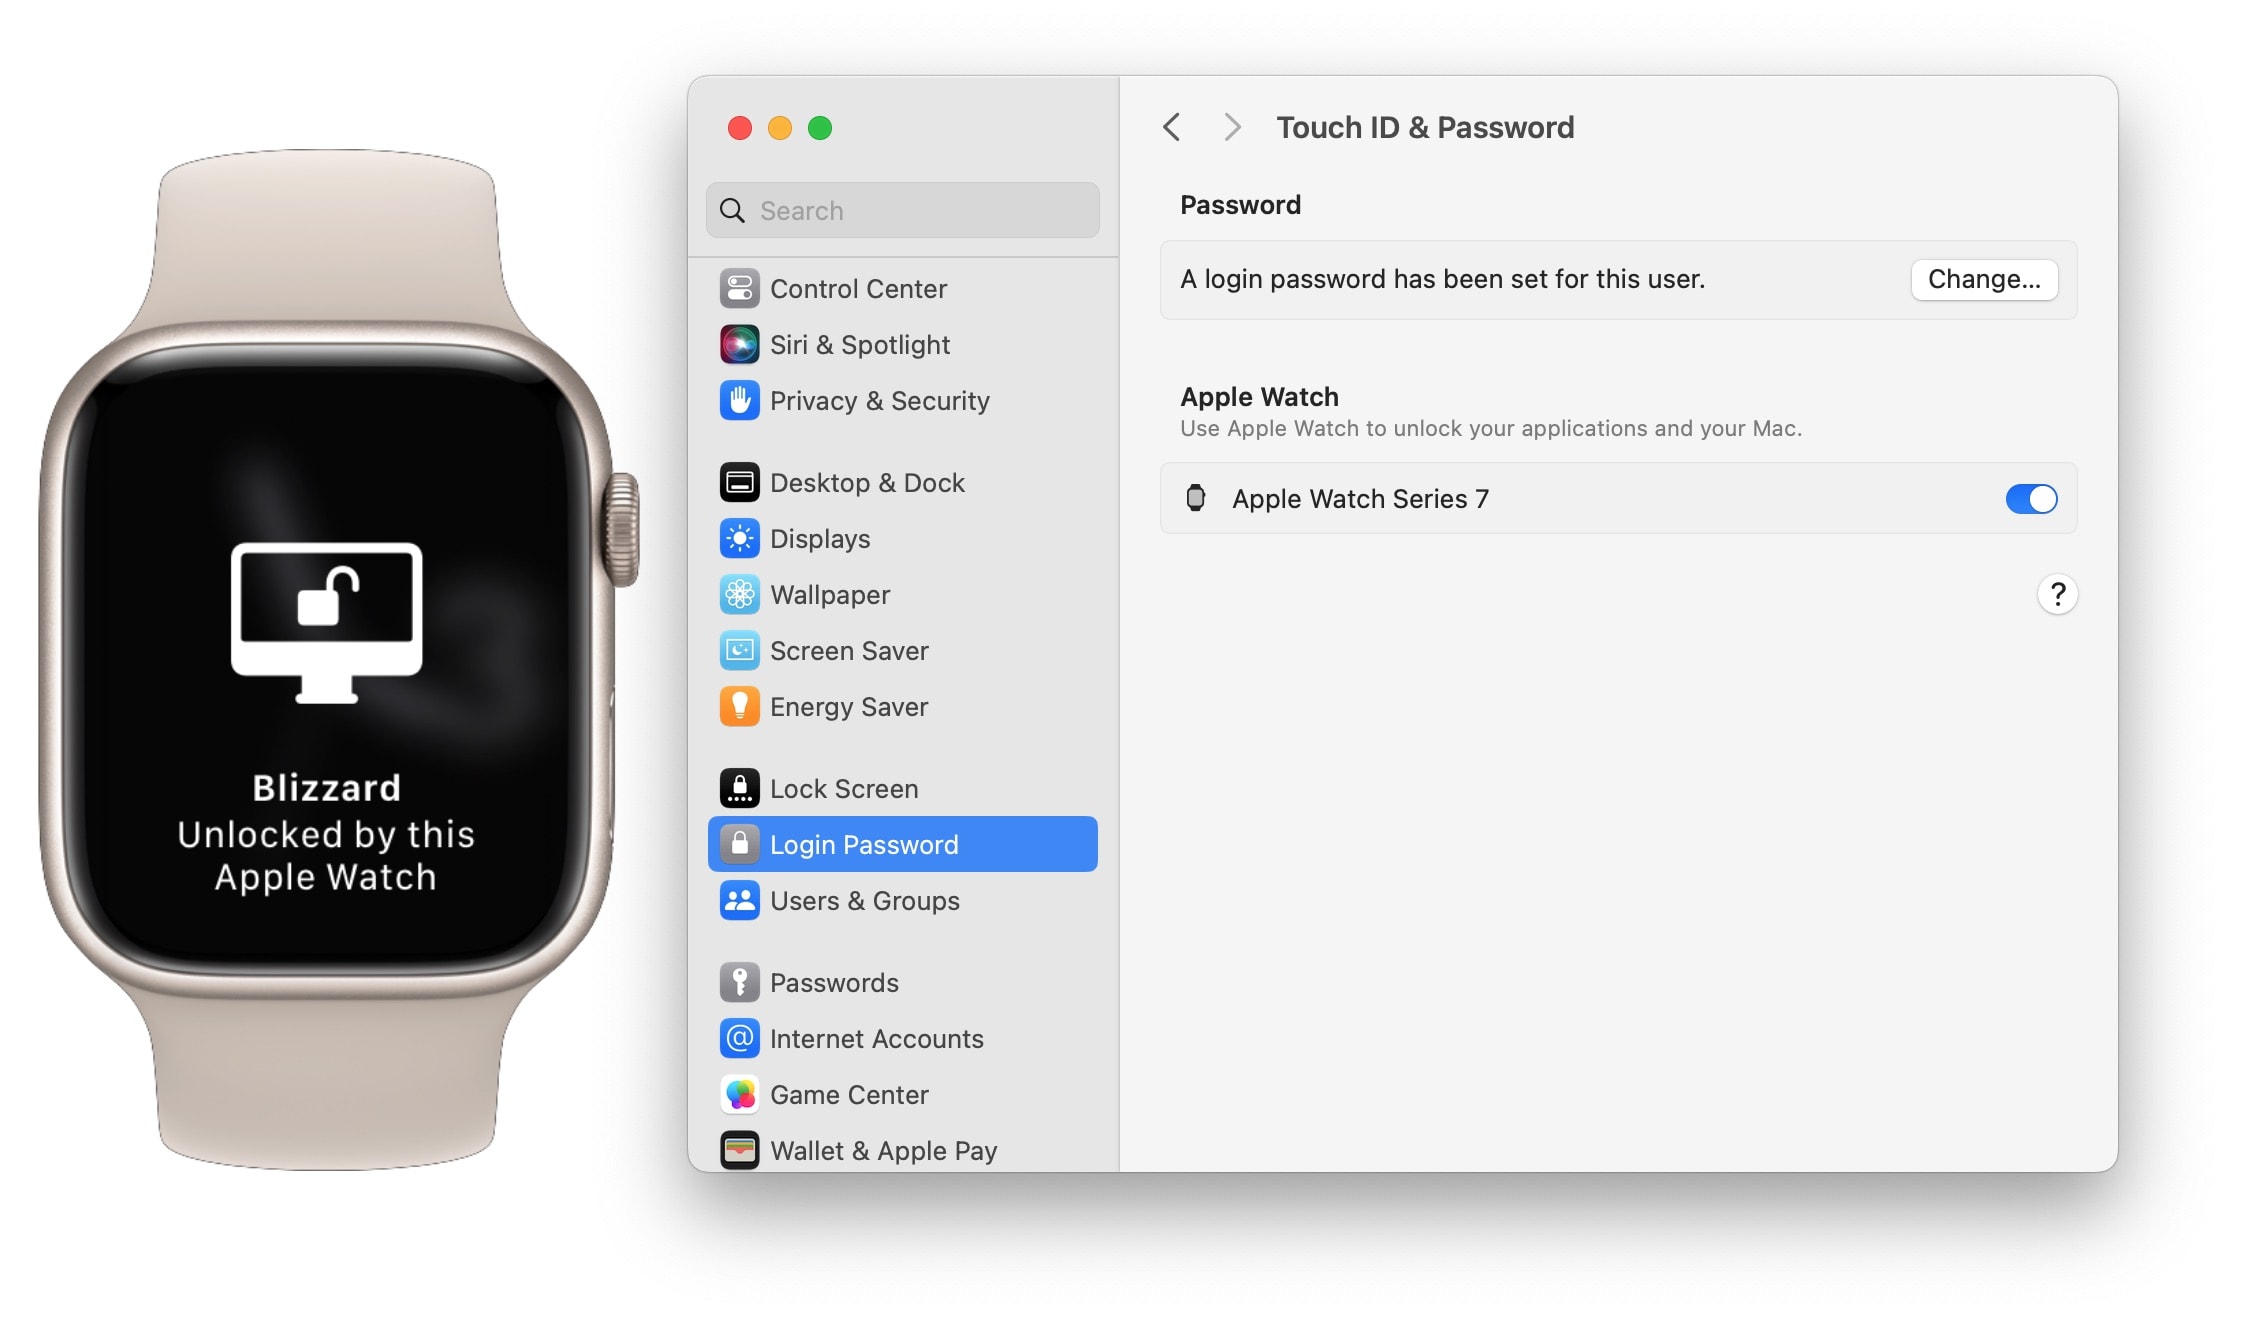 Turning on Unlock with Apple Watch in System Settings